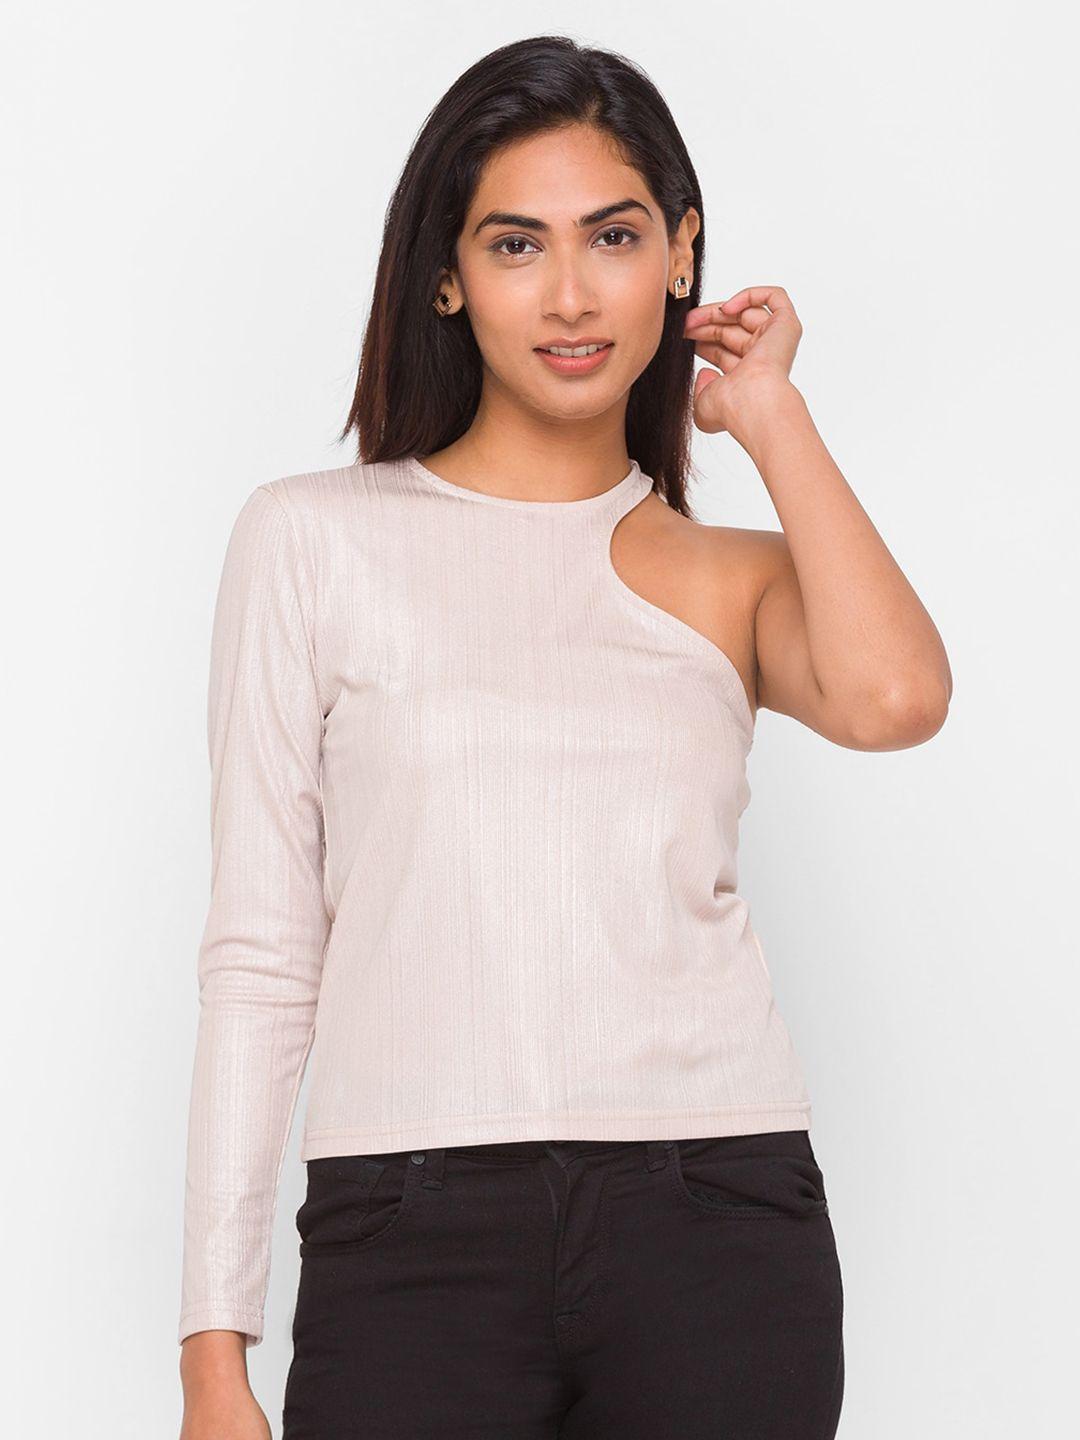 globus gold-toned one side sleeve top